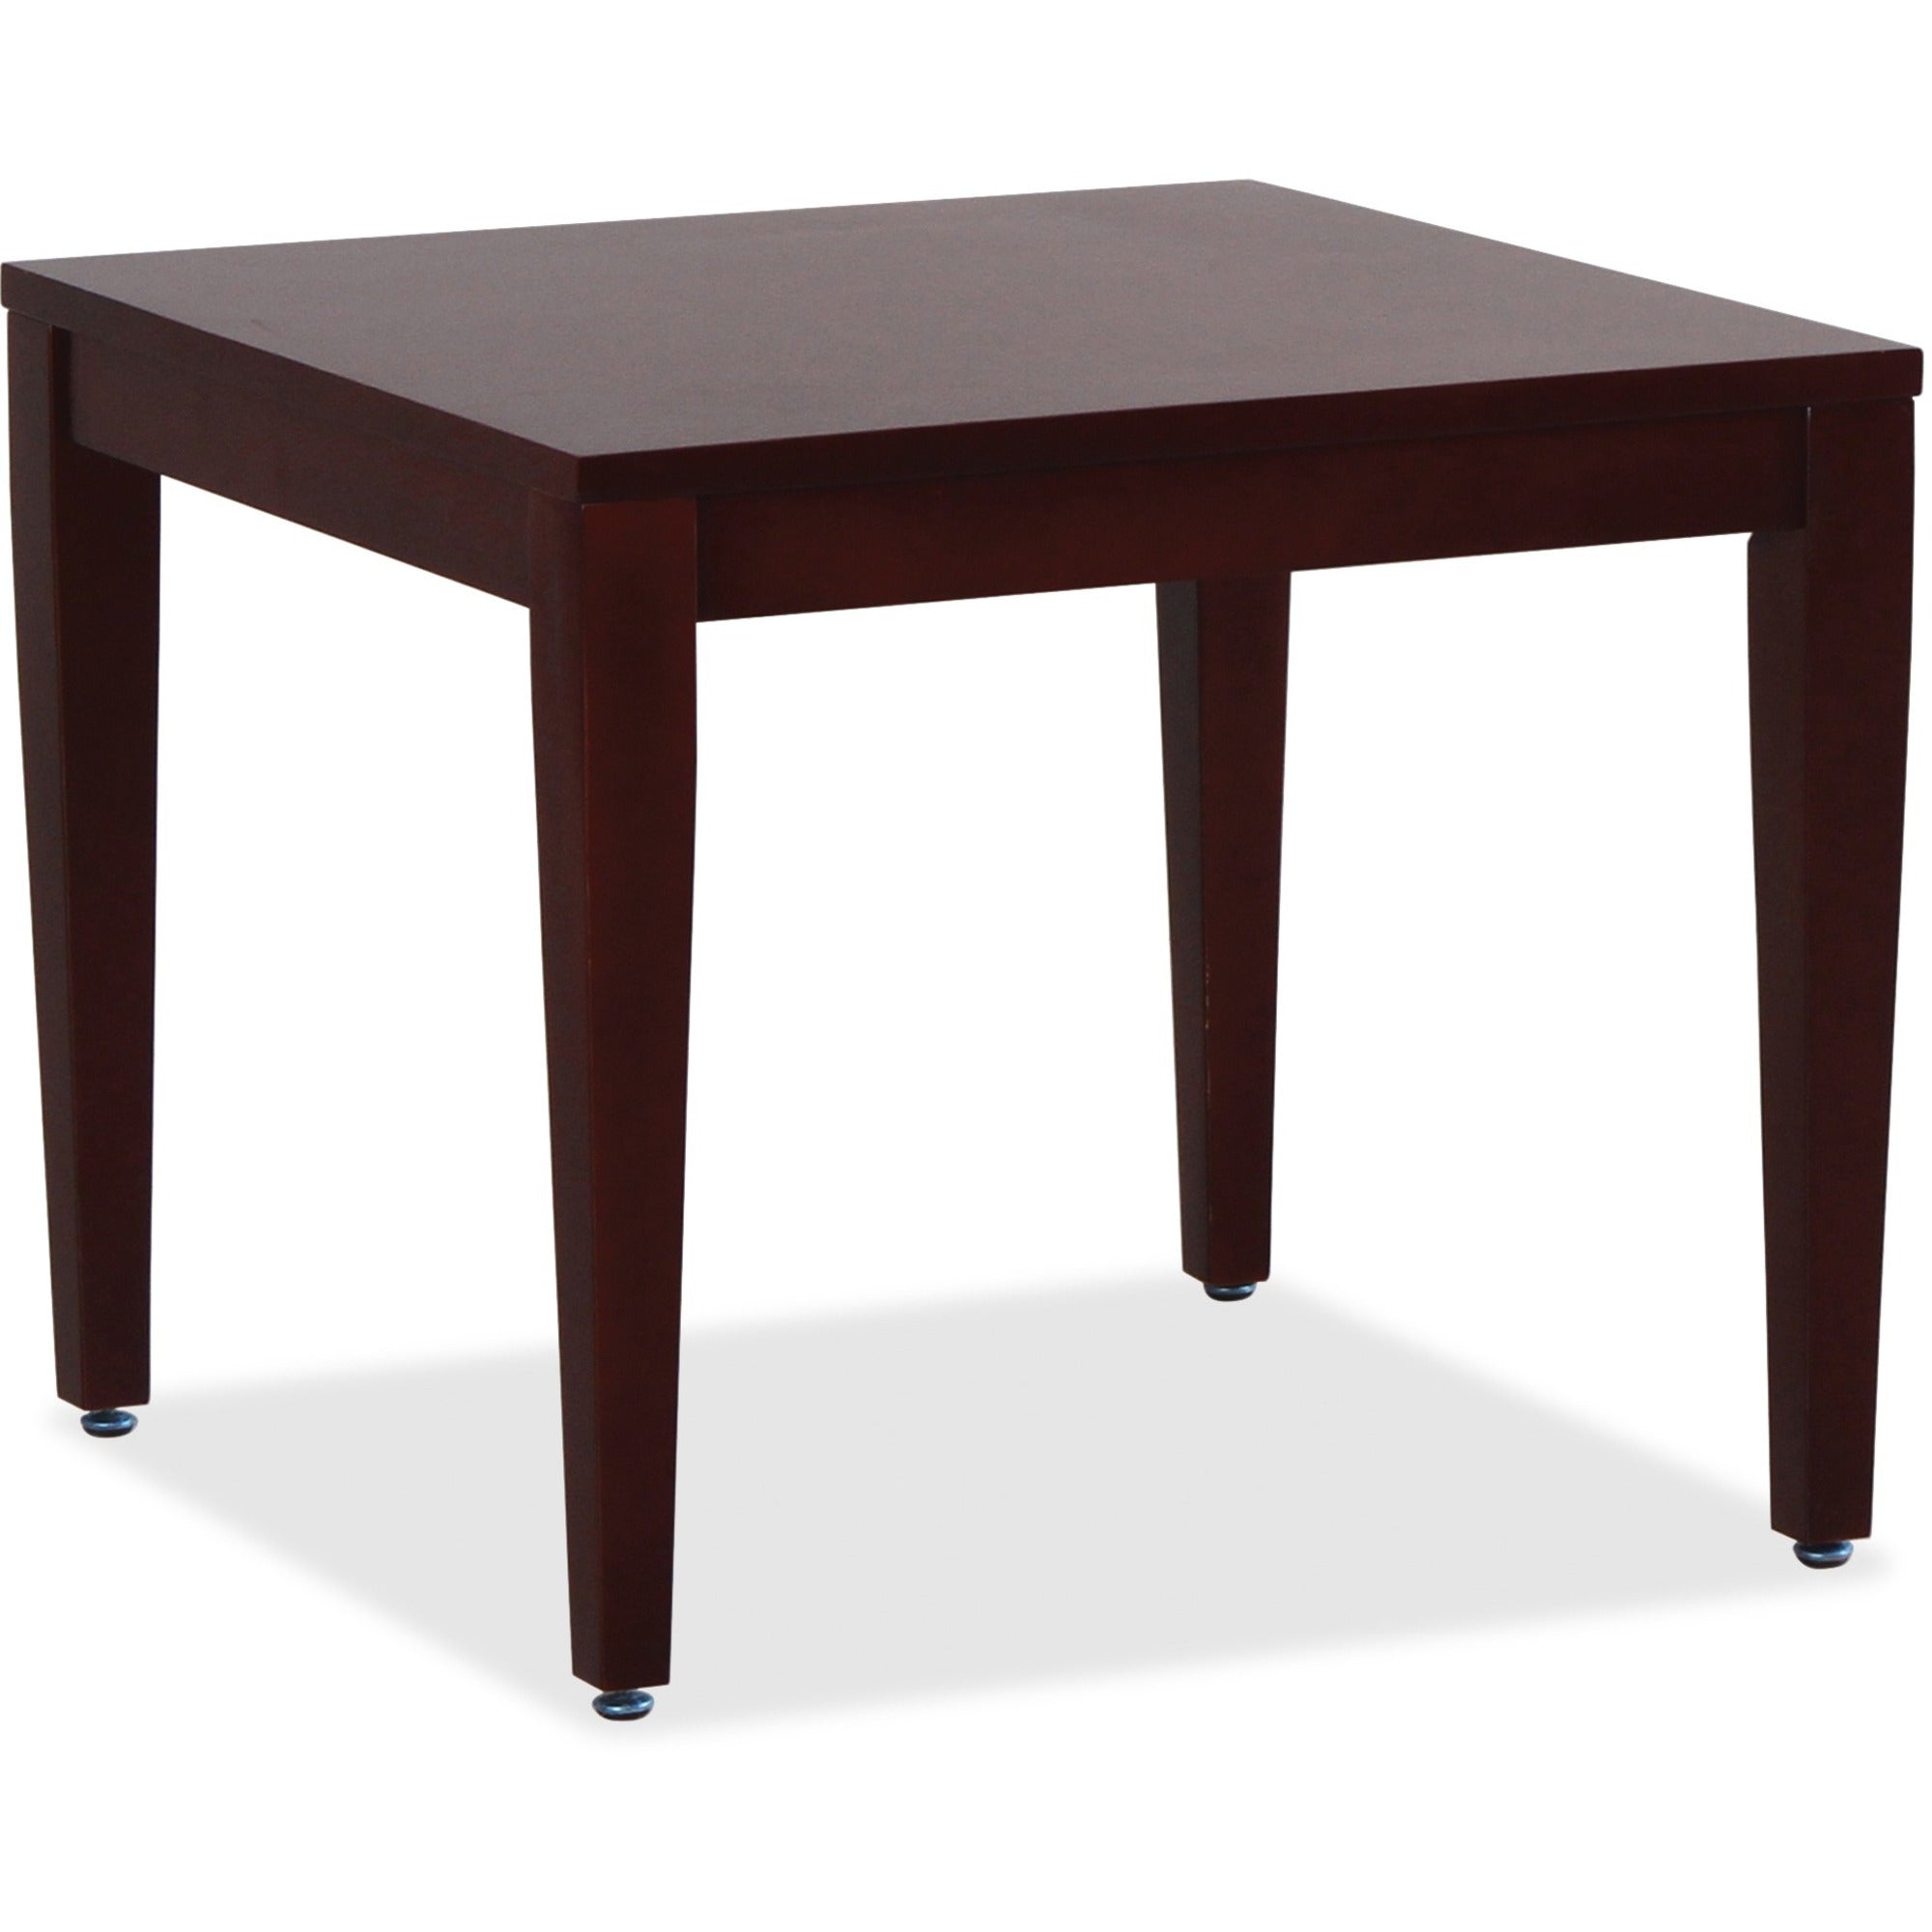 Lorell Solid Wood Corner Table - For - Table TopSquare Top - Four Leg Base - 4 Legs - 23.60" Table Top Length x 23.60" Table Top Width - 20" Height x 23.63" Width x 23.63" Depth - Assembly Required - 1 Each - 